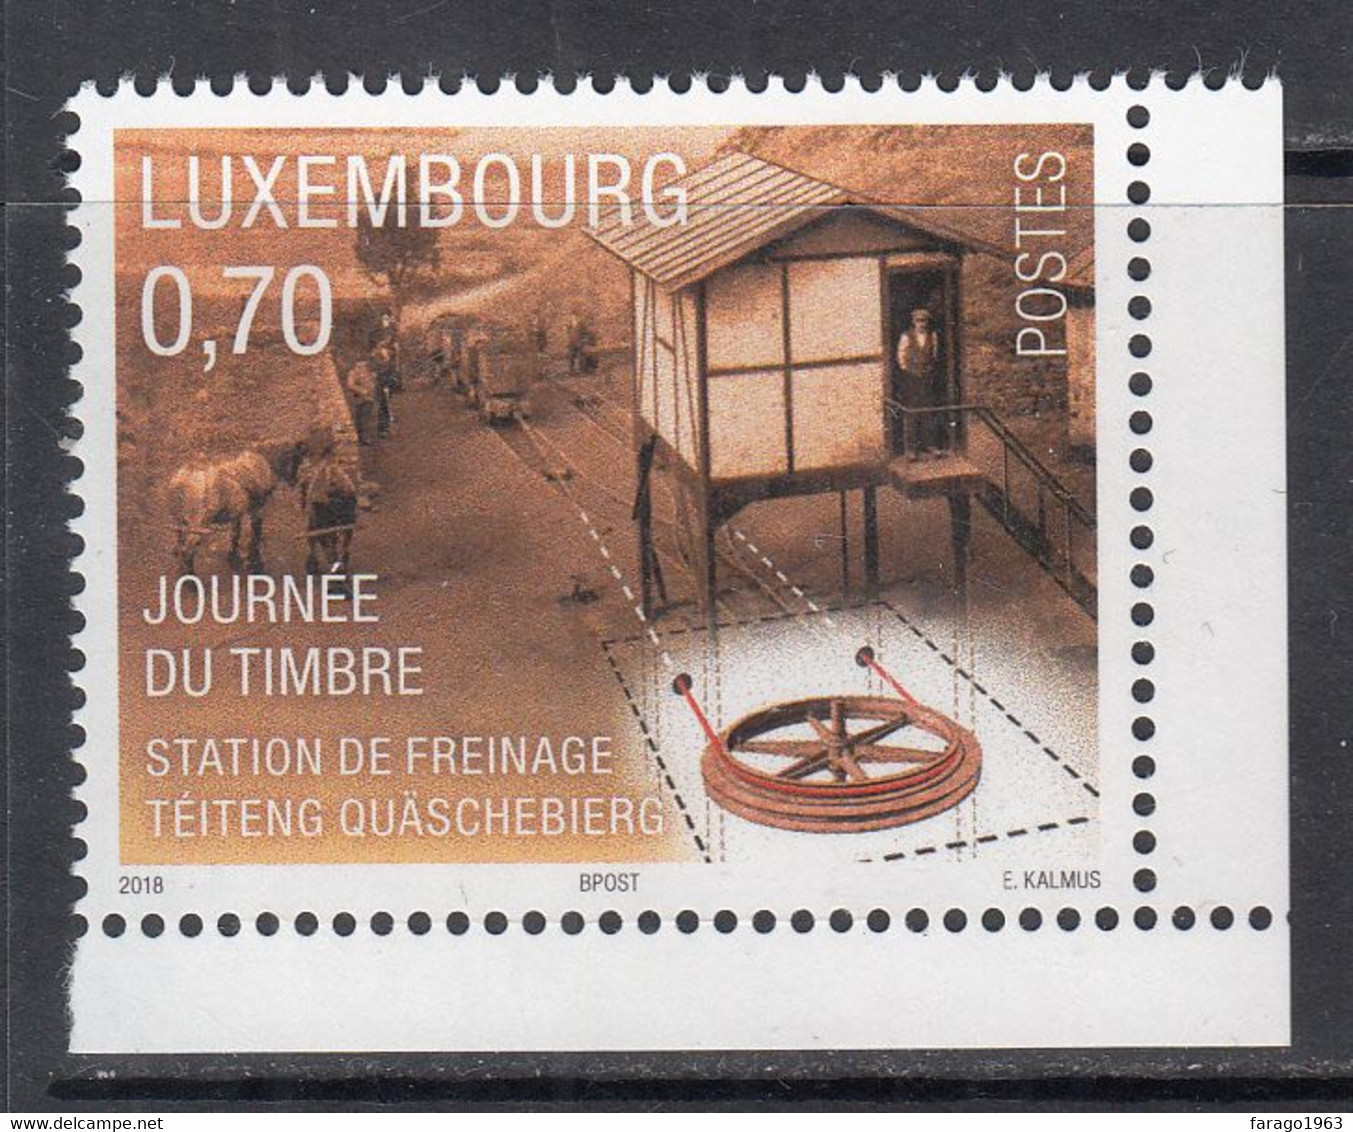 2018 Luxembourg Stamp Day Freinage Station Horses Railway Complete Set Of 1 MNH @ Below Face Value - Nuevos